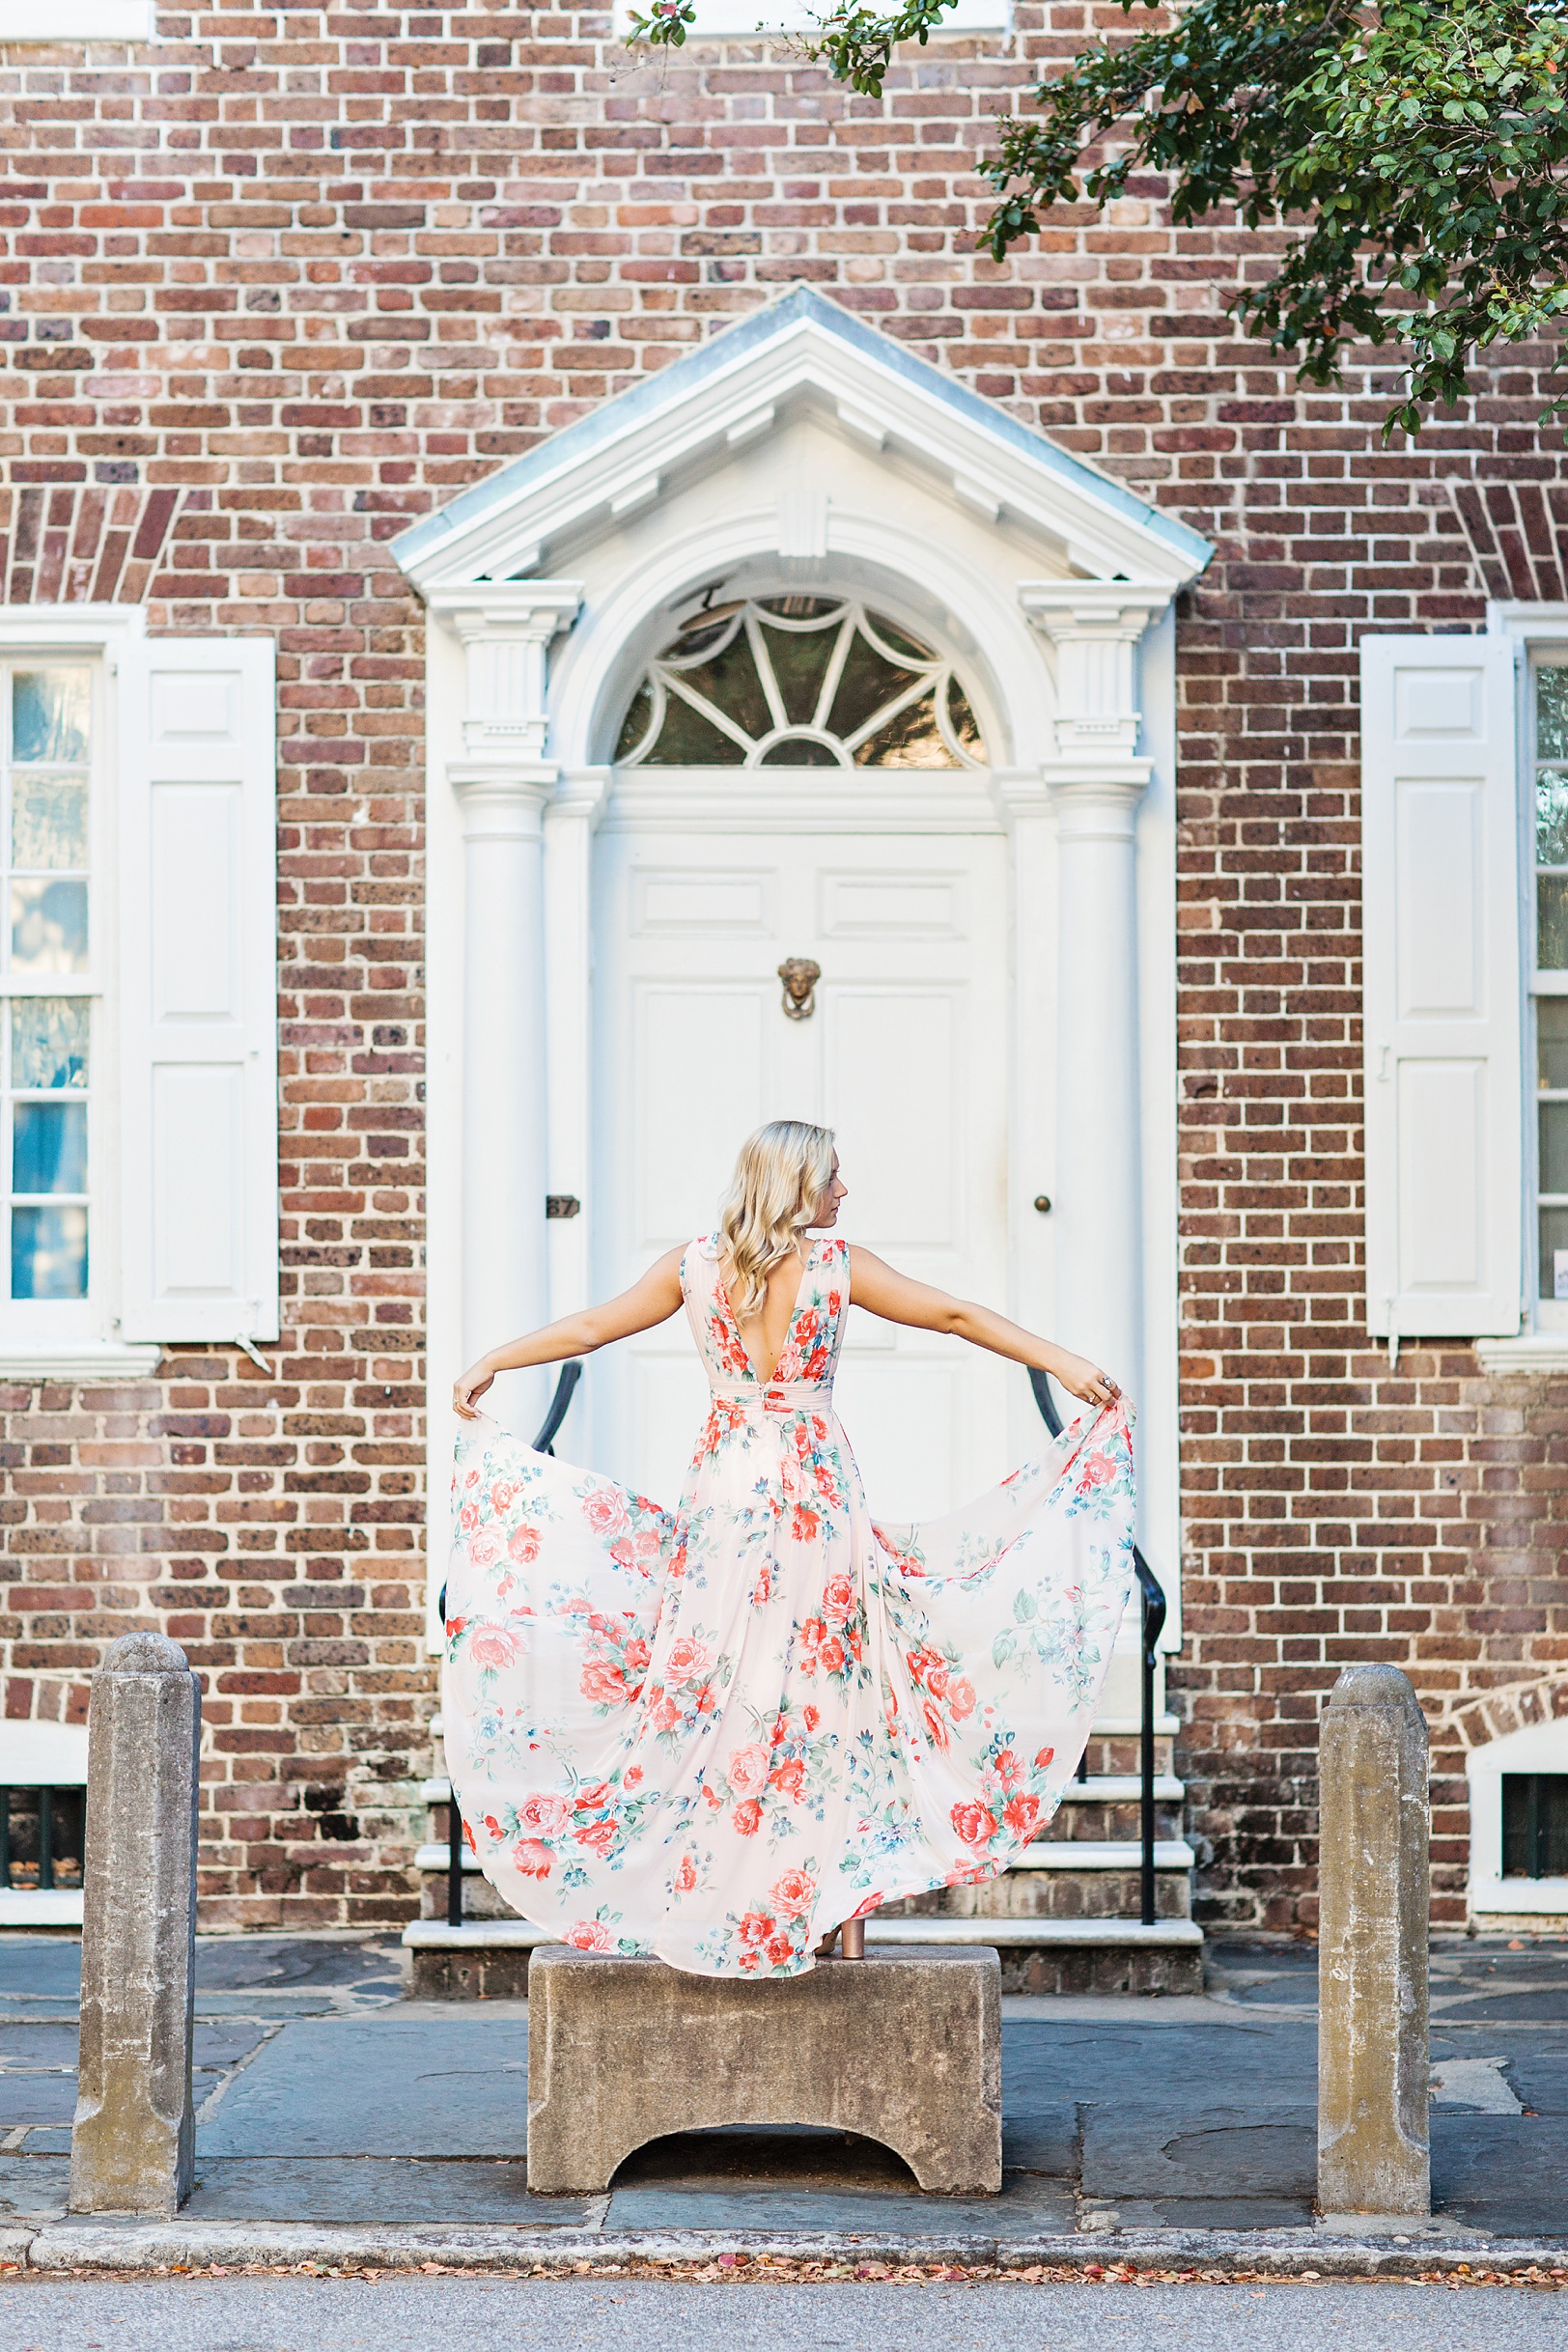 Historic Downtown Charleston Senior Session by brick home with floral dress | Kaitlin Scott Photography